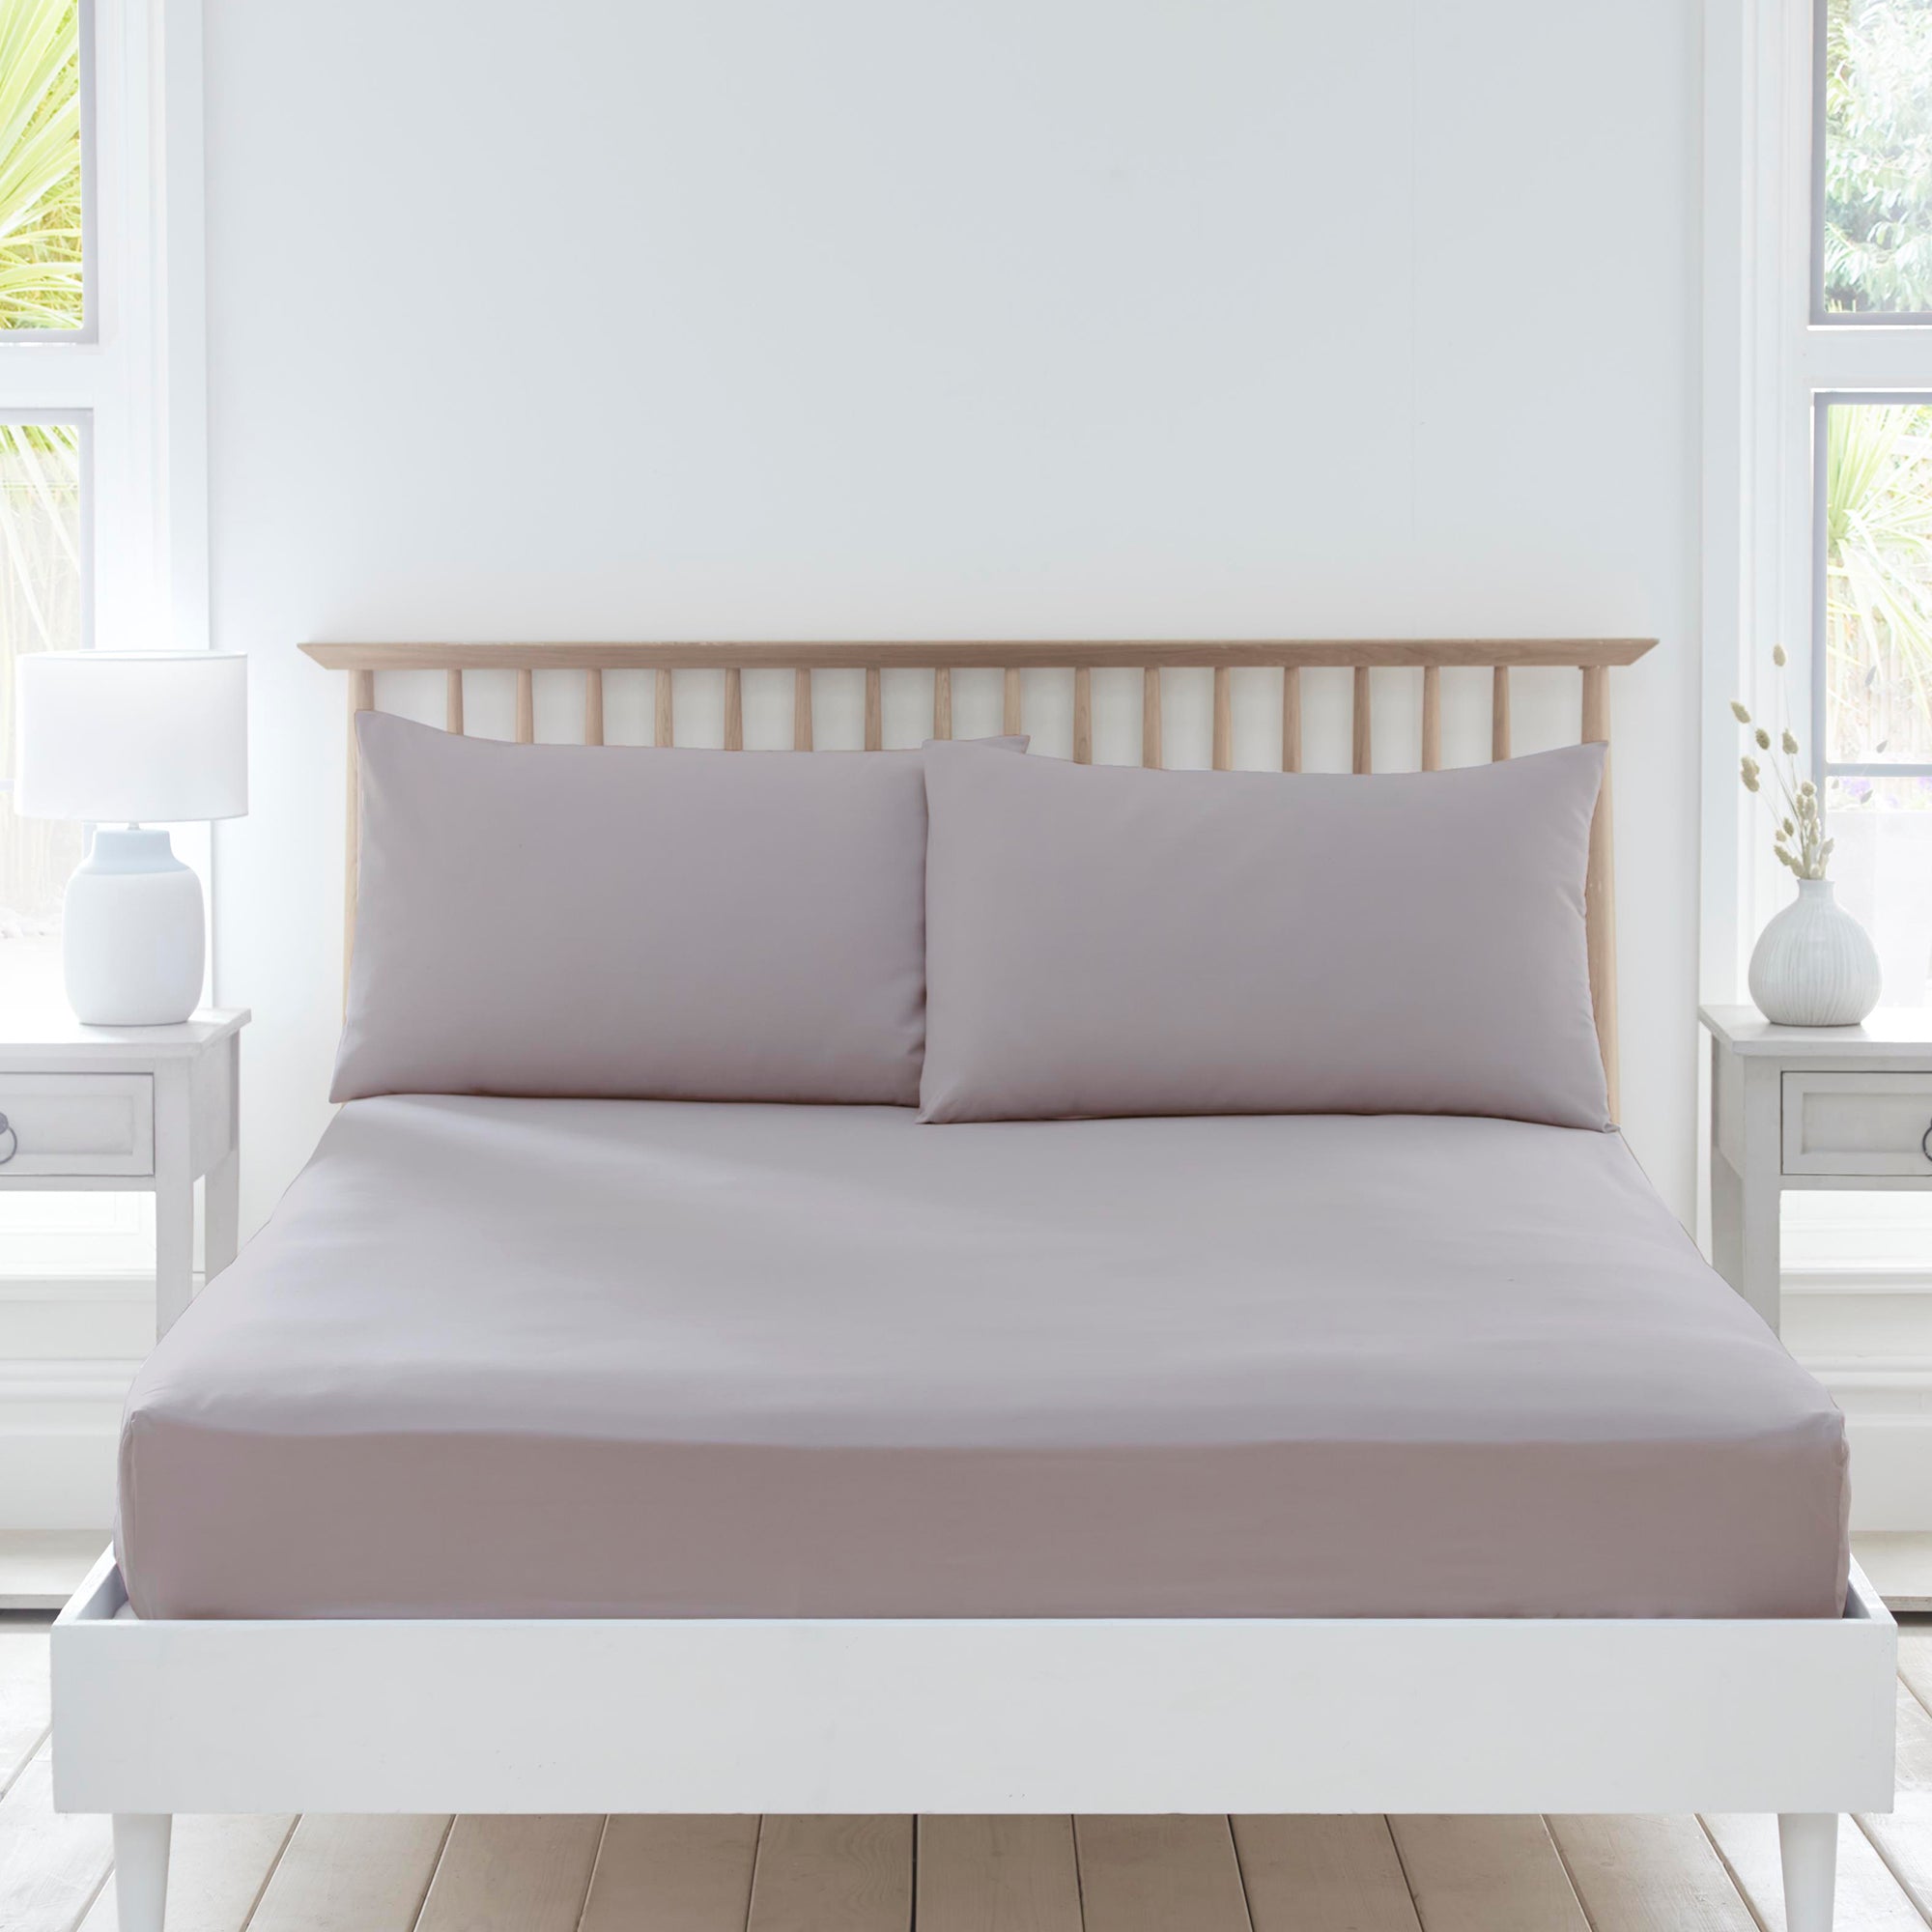 Sheets - Eco-Friendly 28cm Fitted Bed Sheet & Optional Pillowcases in Amethyst - by Drift Home